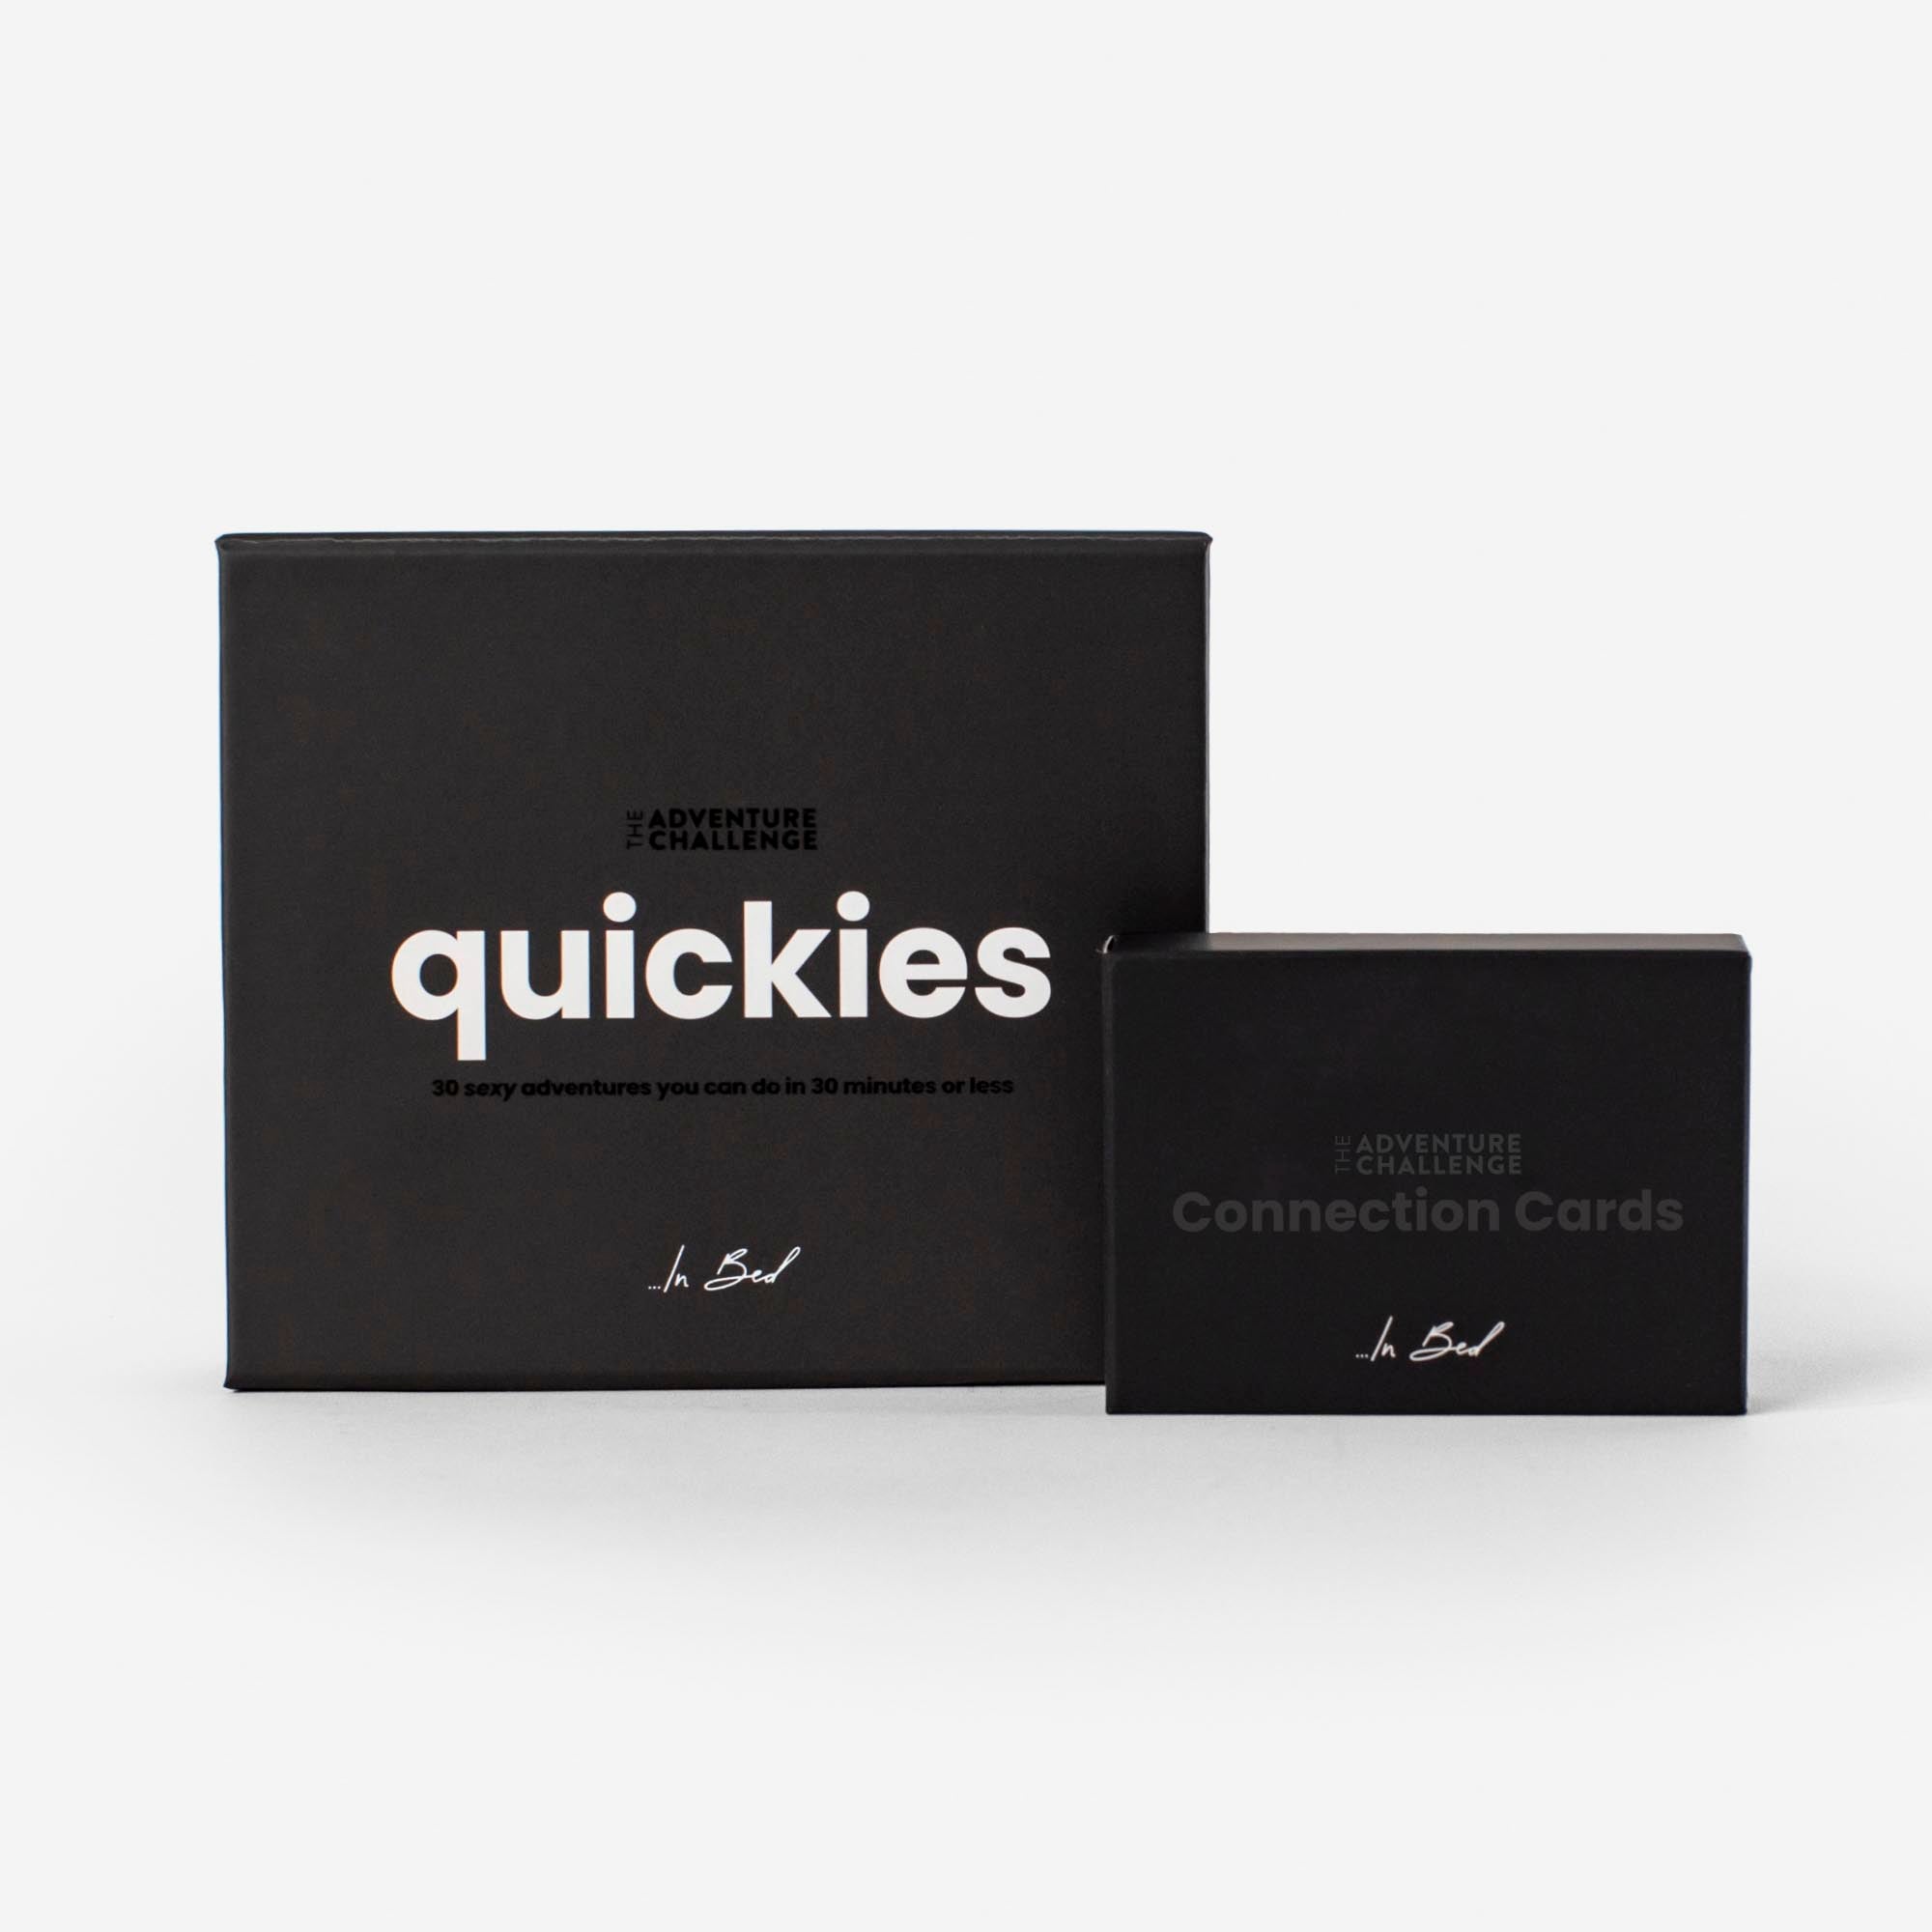 Quickies and Connection Cards | ...In Bed Bundle